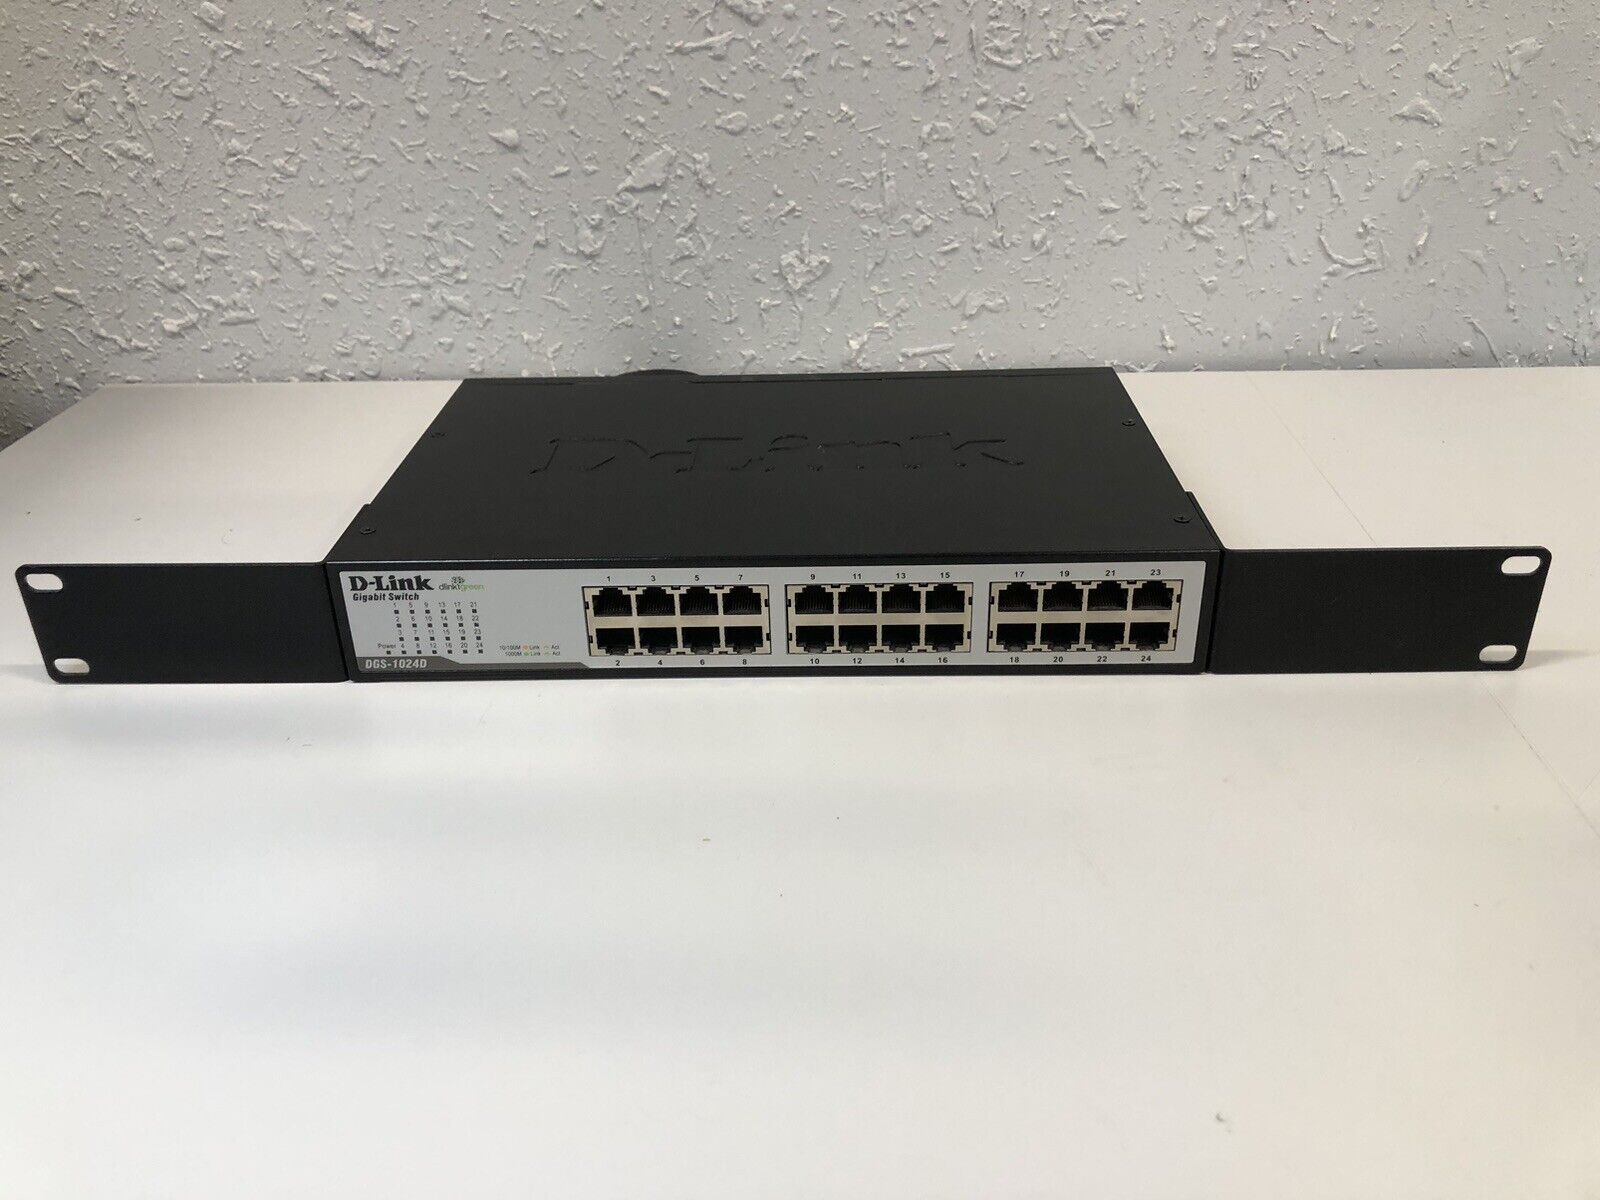 D-Link DGS-1024D | 24-Port Switch | Tested and Working w/ Server Rack Ears